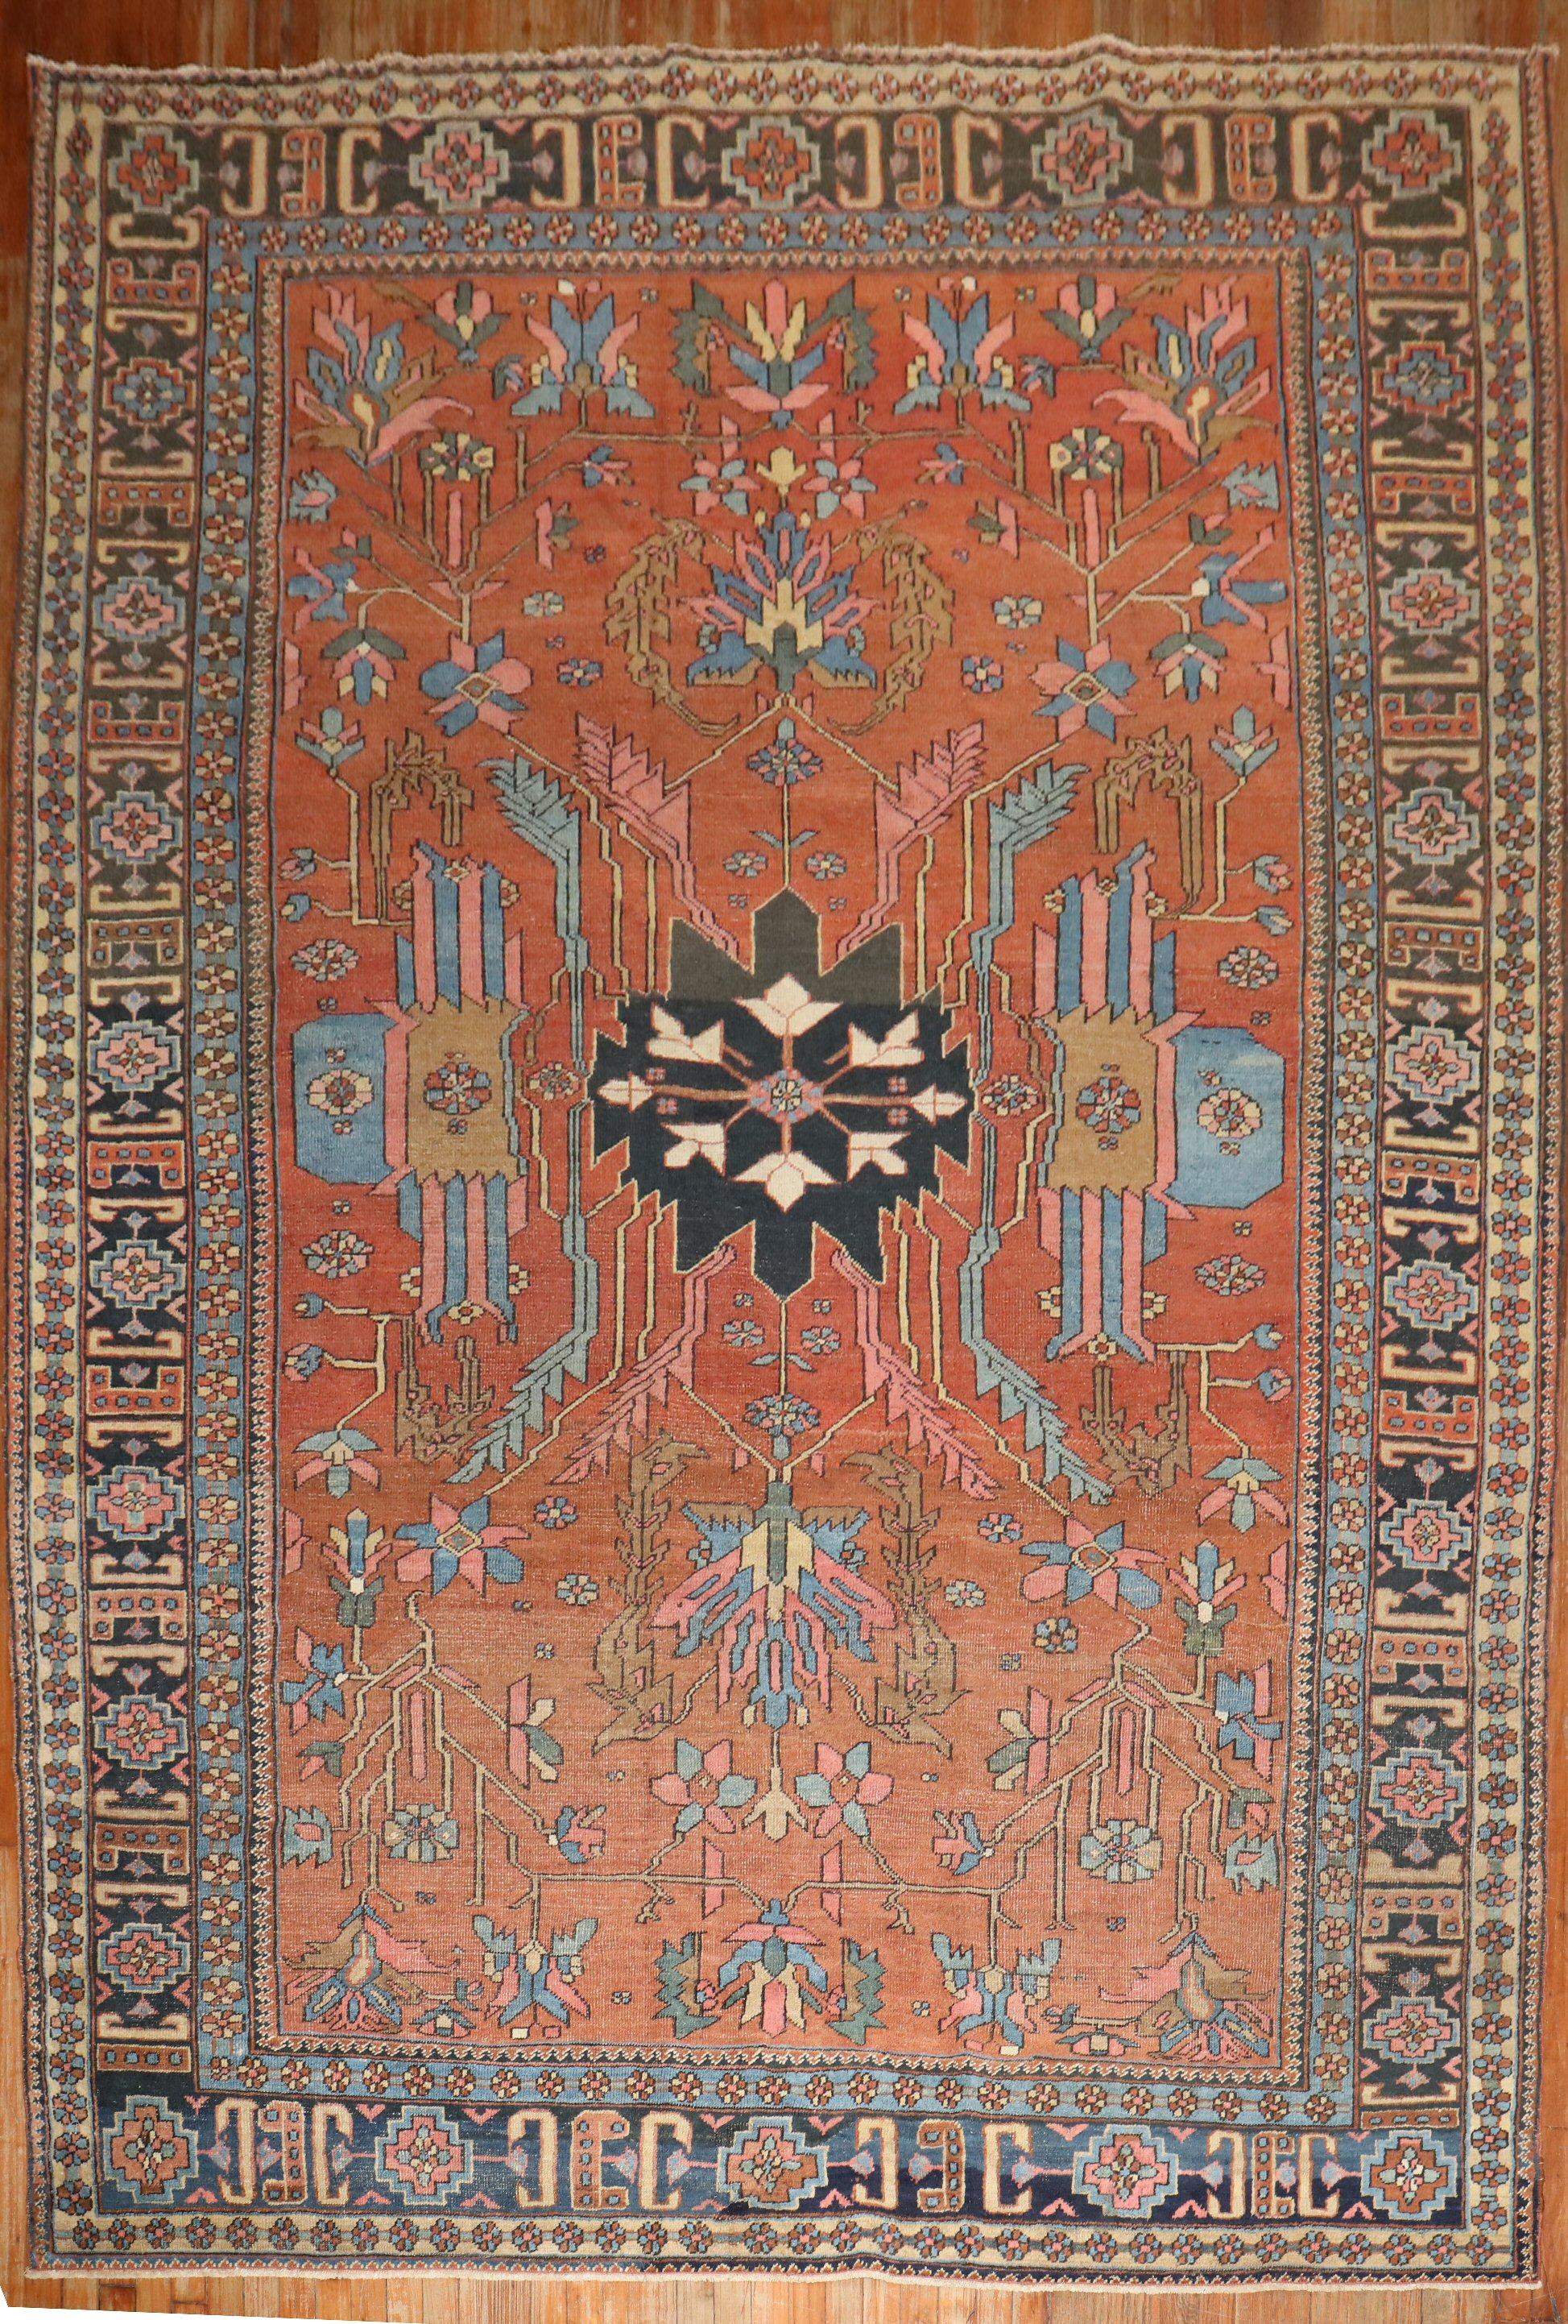 Wonderful high decorative antique Persian Heriz Rug from the 1st quarter of the 20th century

7'11'' x 11'4''

The finest antique Persian Heriz rugs are geometric in design with open spacious patterns invibrant colors. The great majority of them